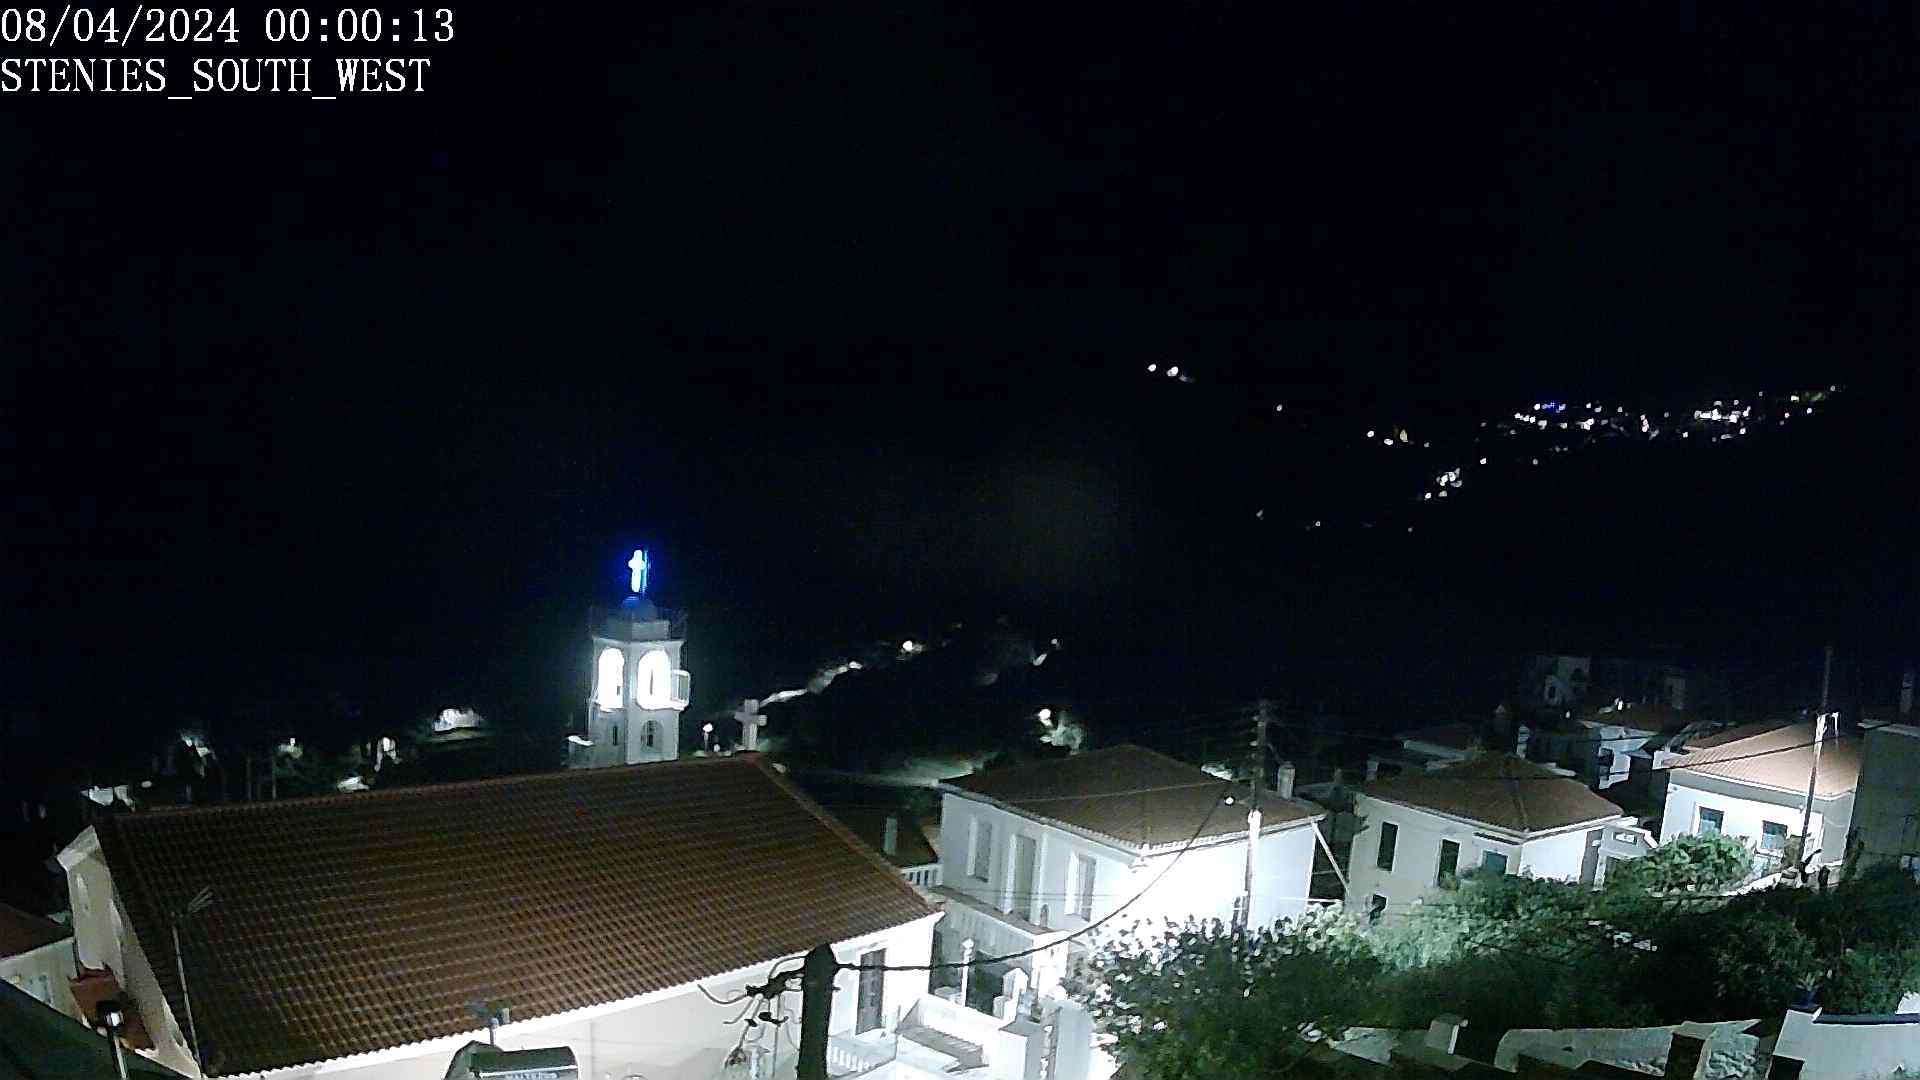 time-lapse frame, Stenies. Andros Island  SW View webcam